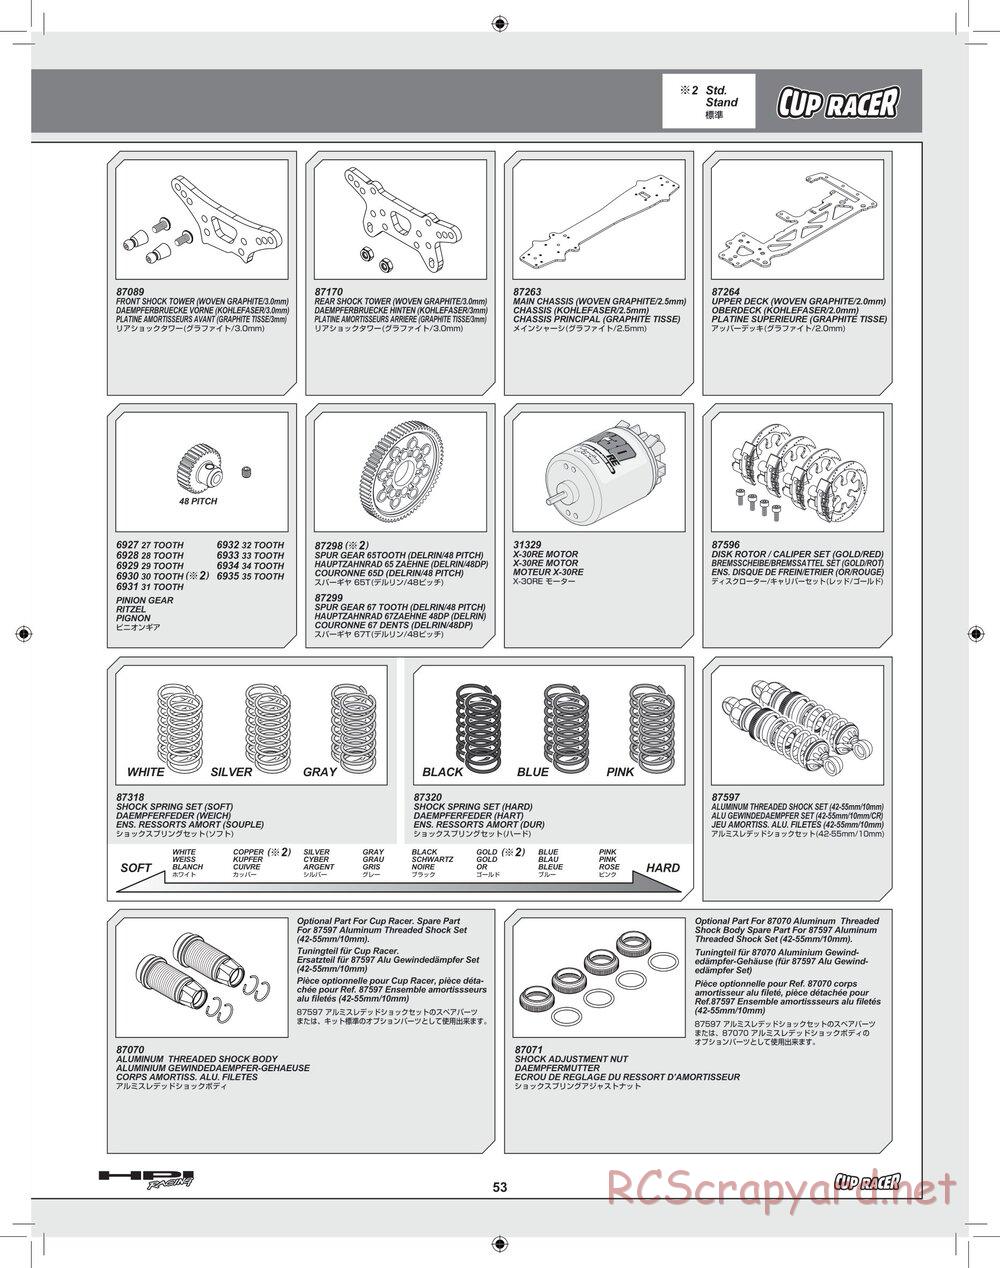 HPI - Cup Racer - Manual - Page 53